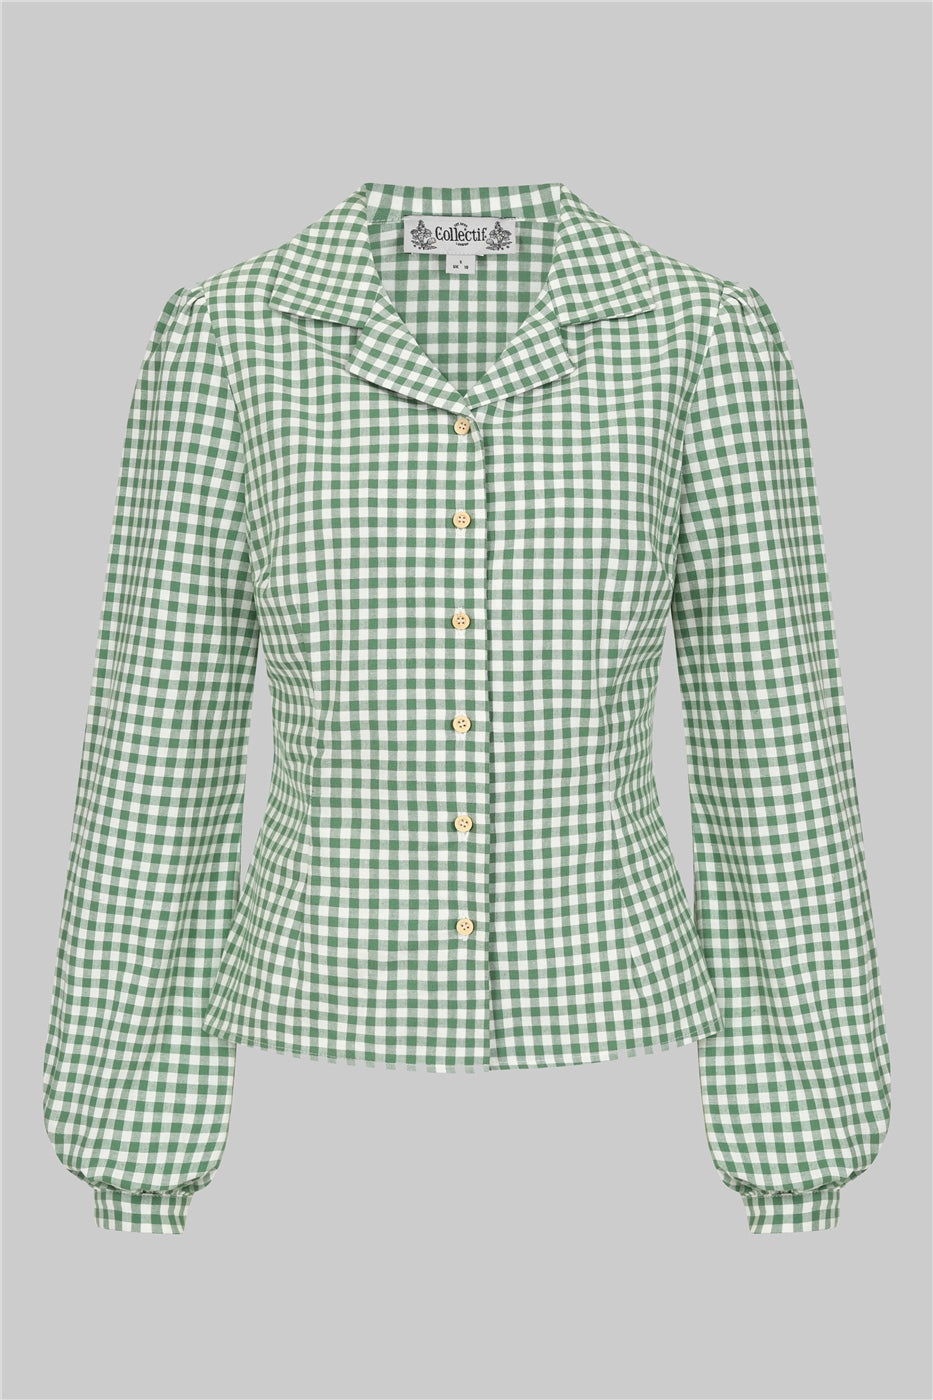 Jerry Green Gingham Blouse by Collectif